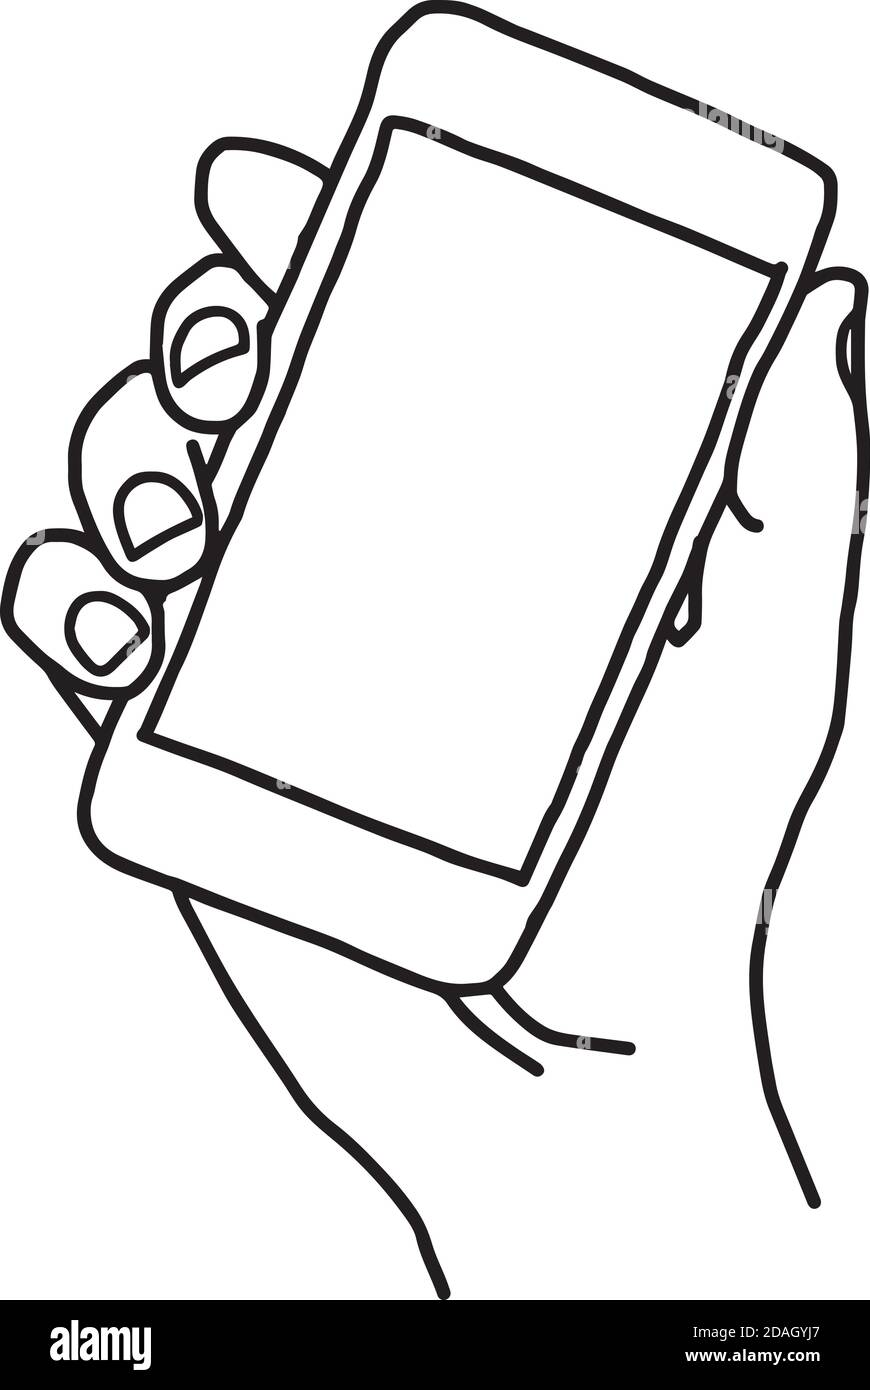 11653 Hand Holding Phone Sketch Images Stock Photos  Vectors   Shutterstock